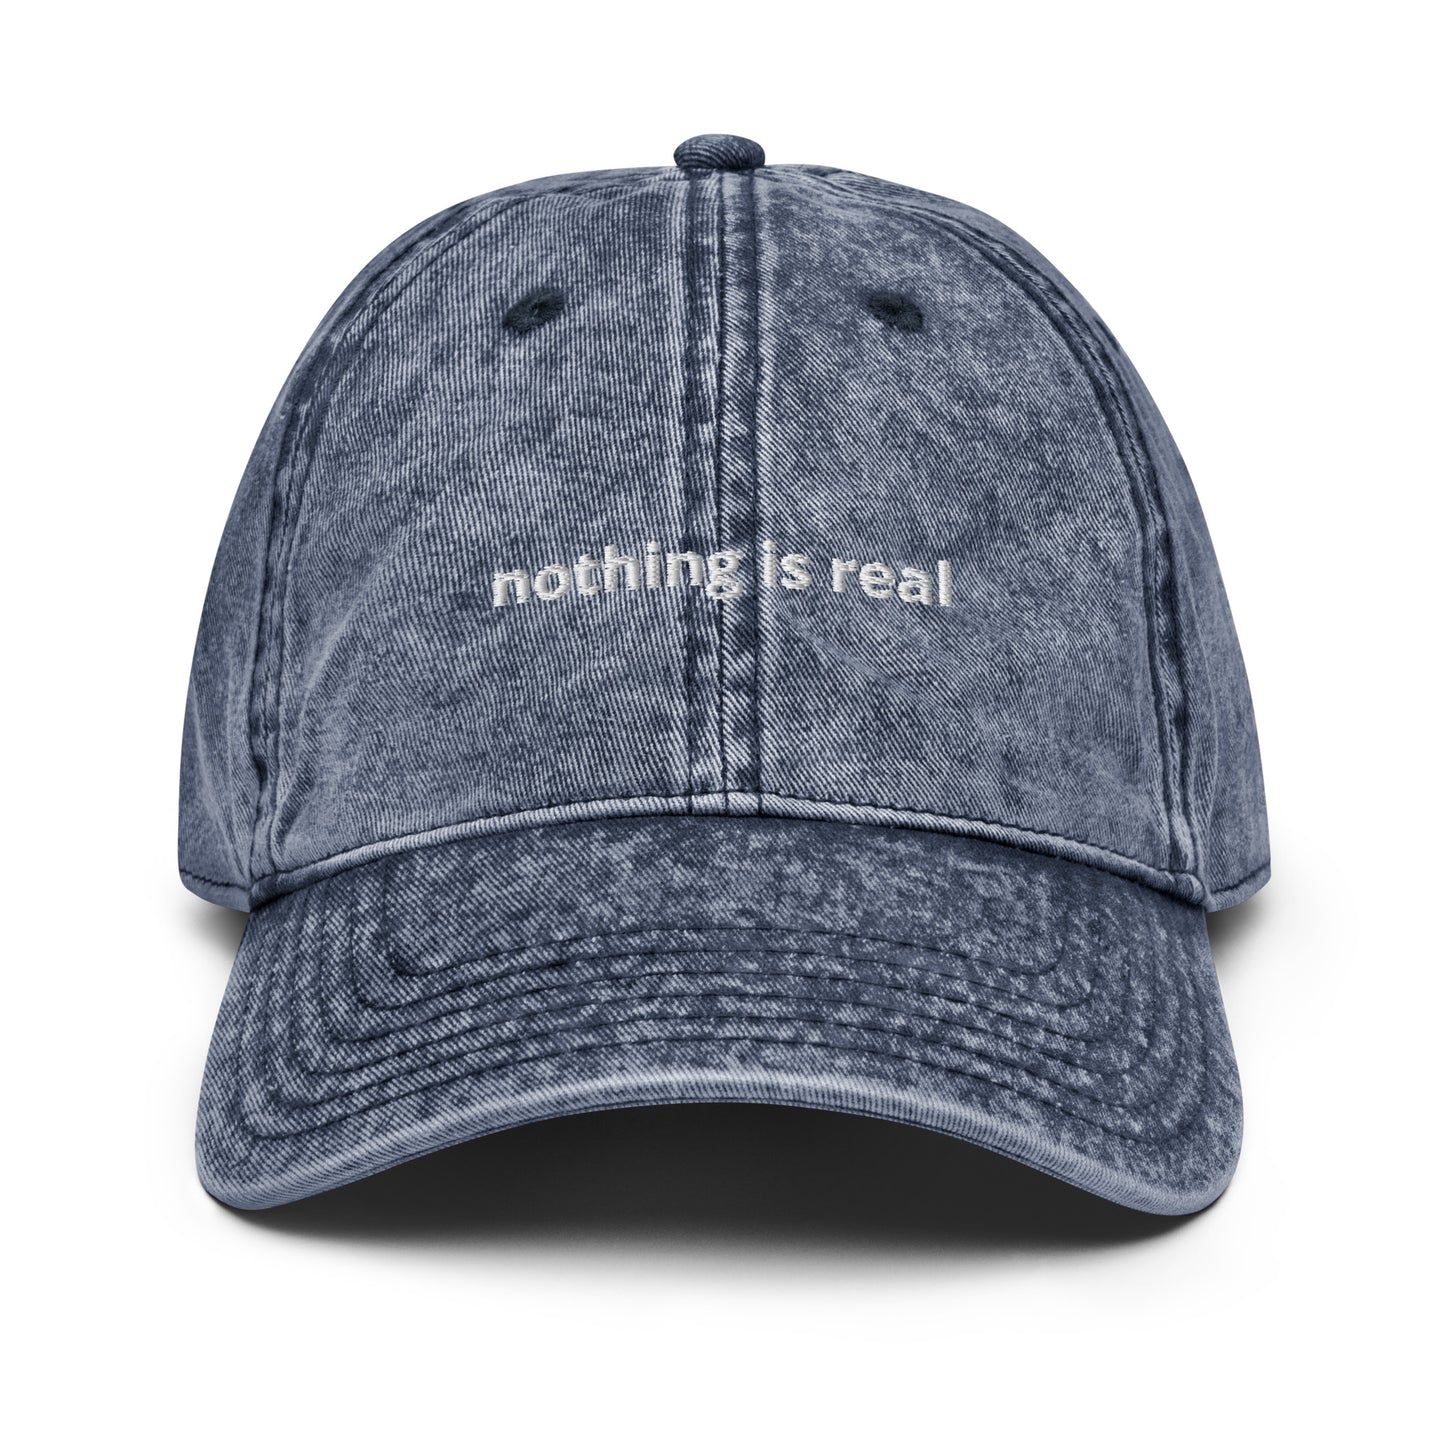 'nothing is real' - Vintage Cotton Greeting Hat